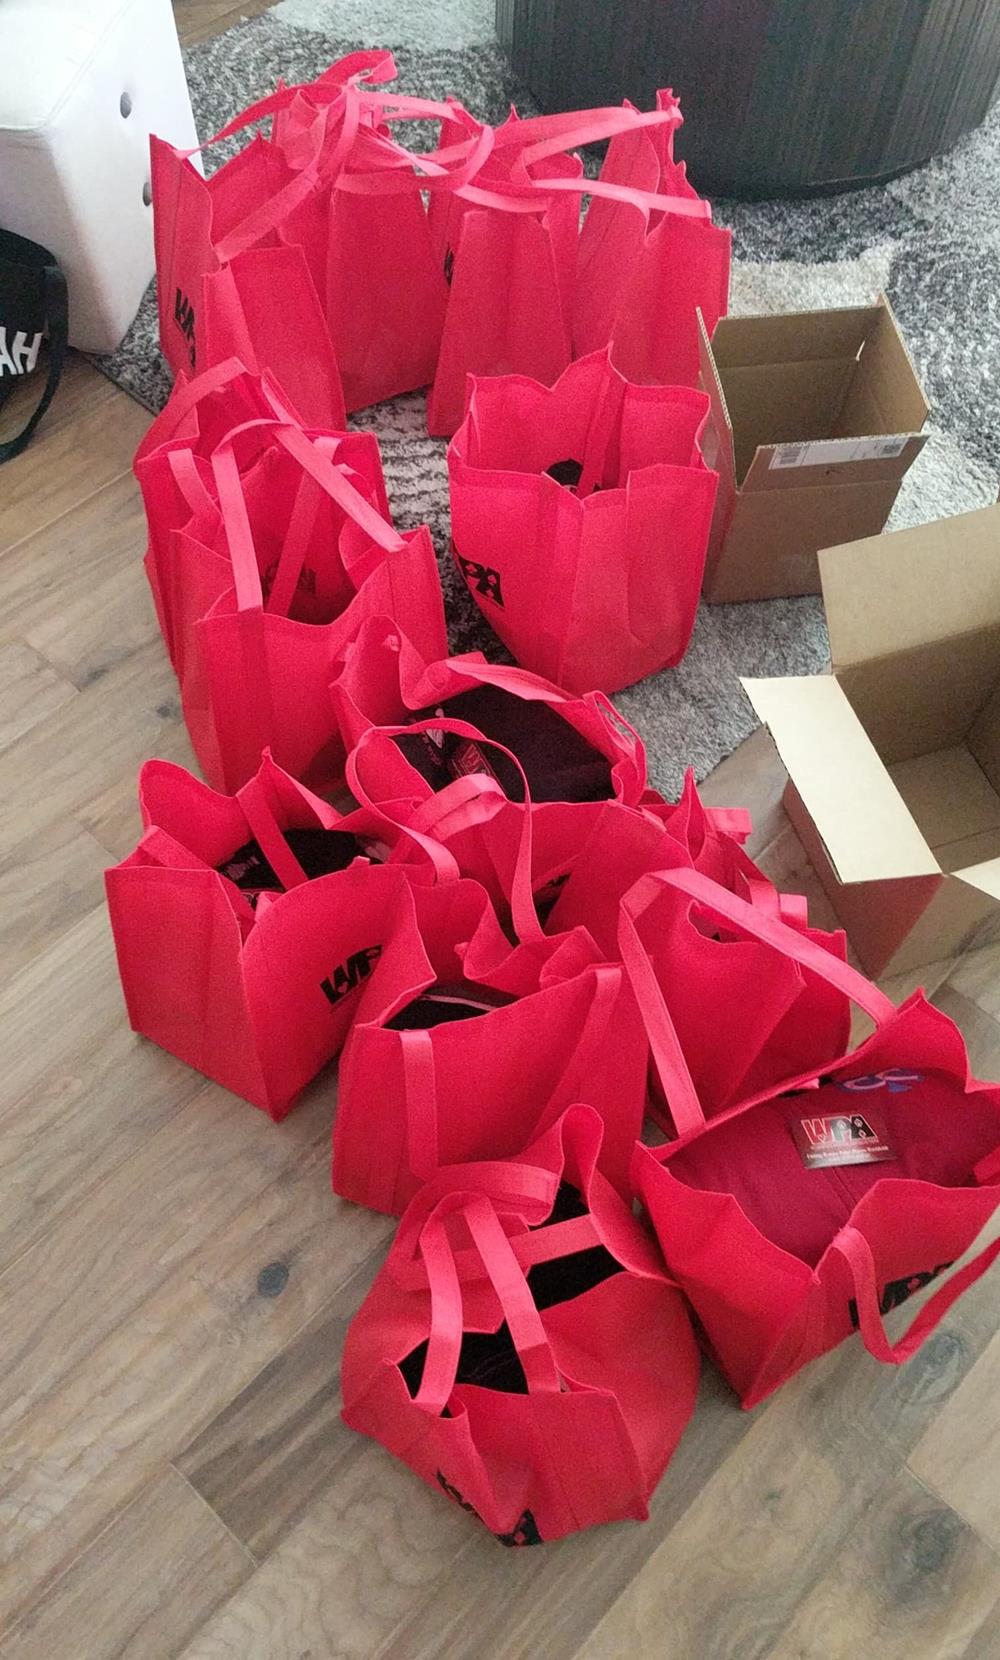 a group of red bags on a floor